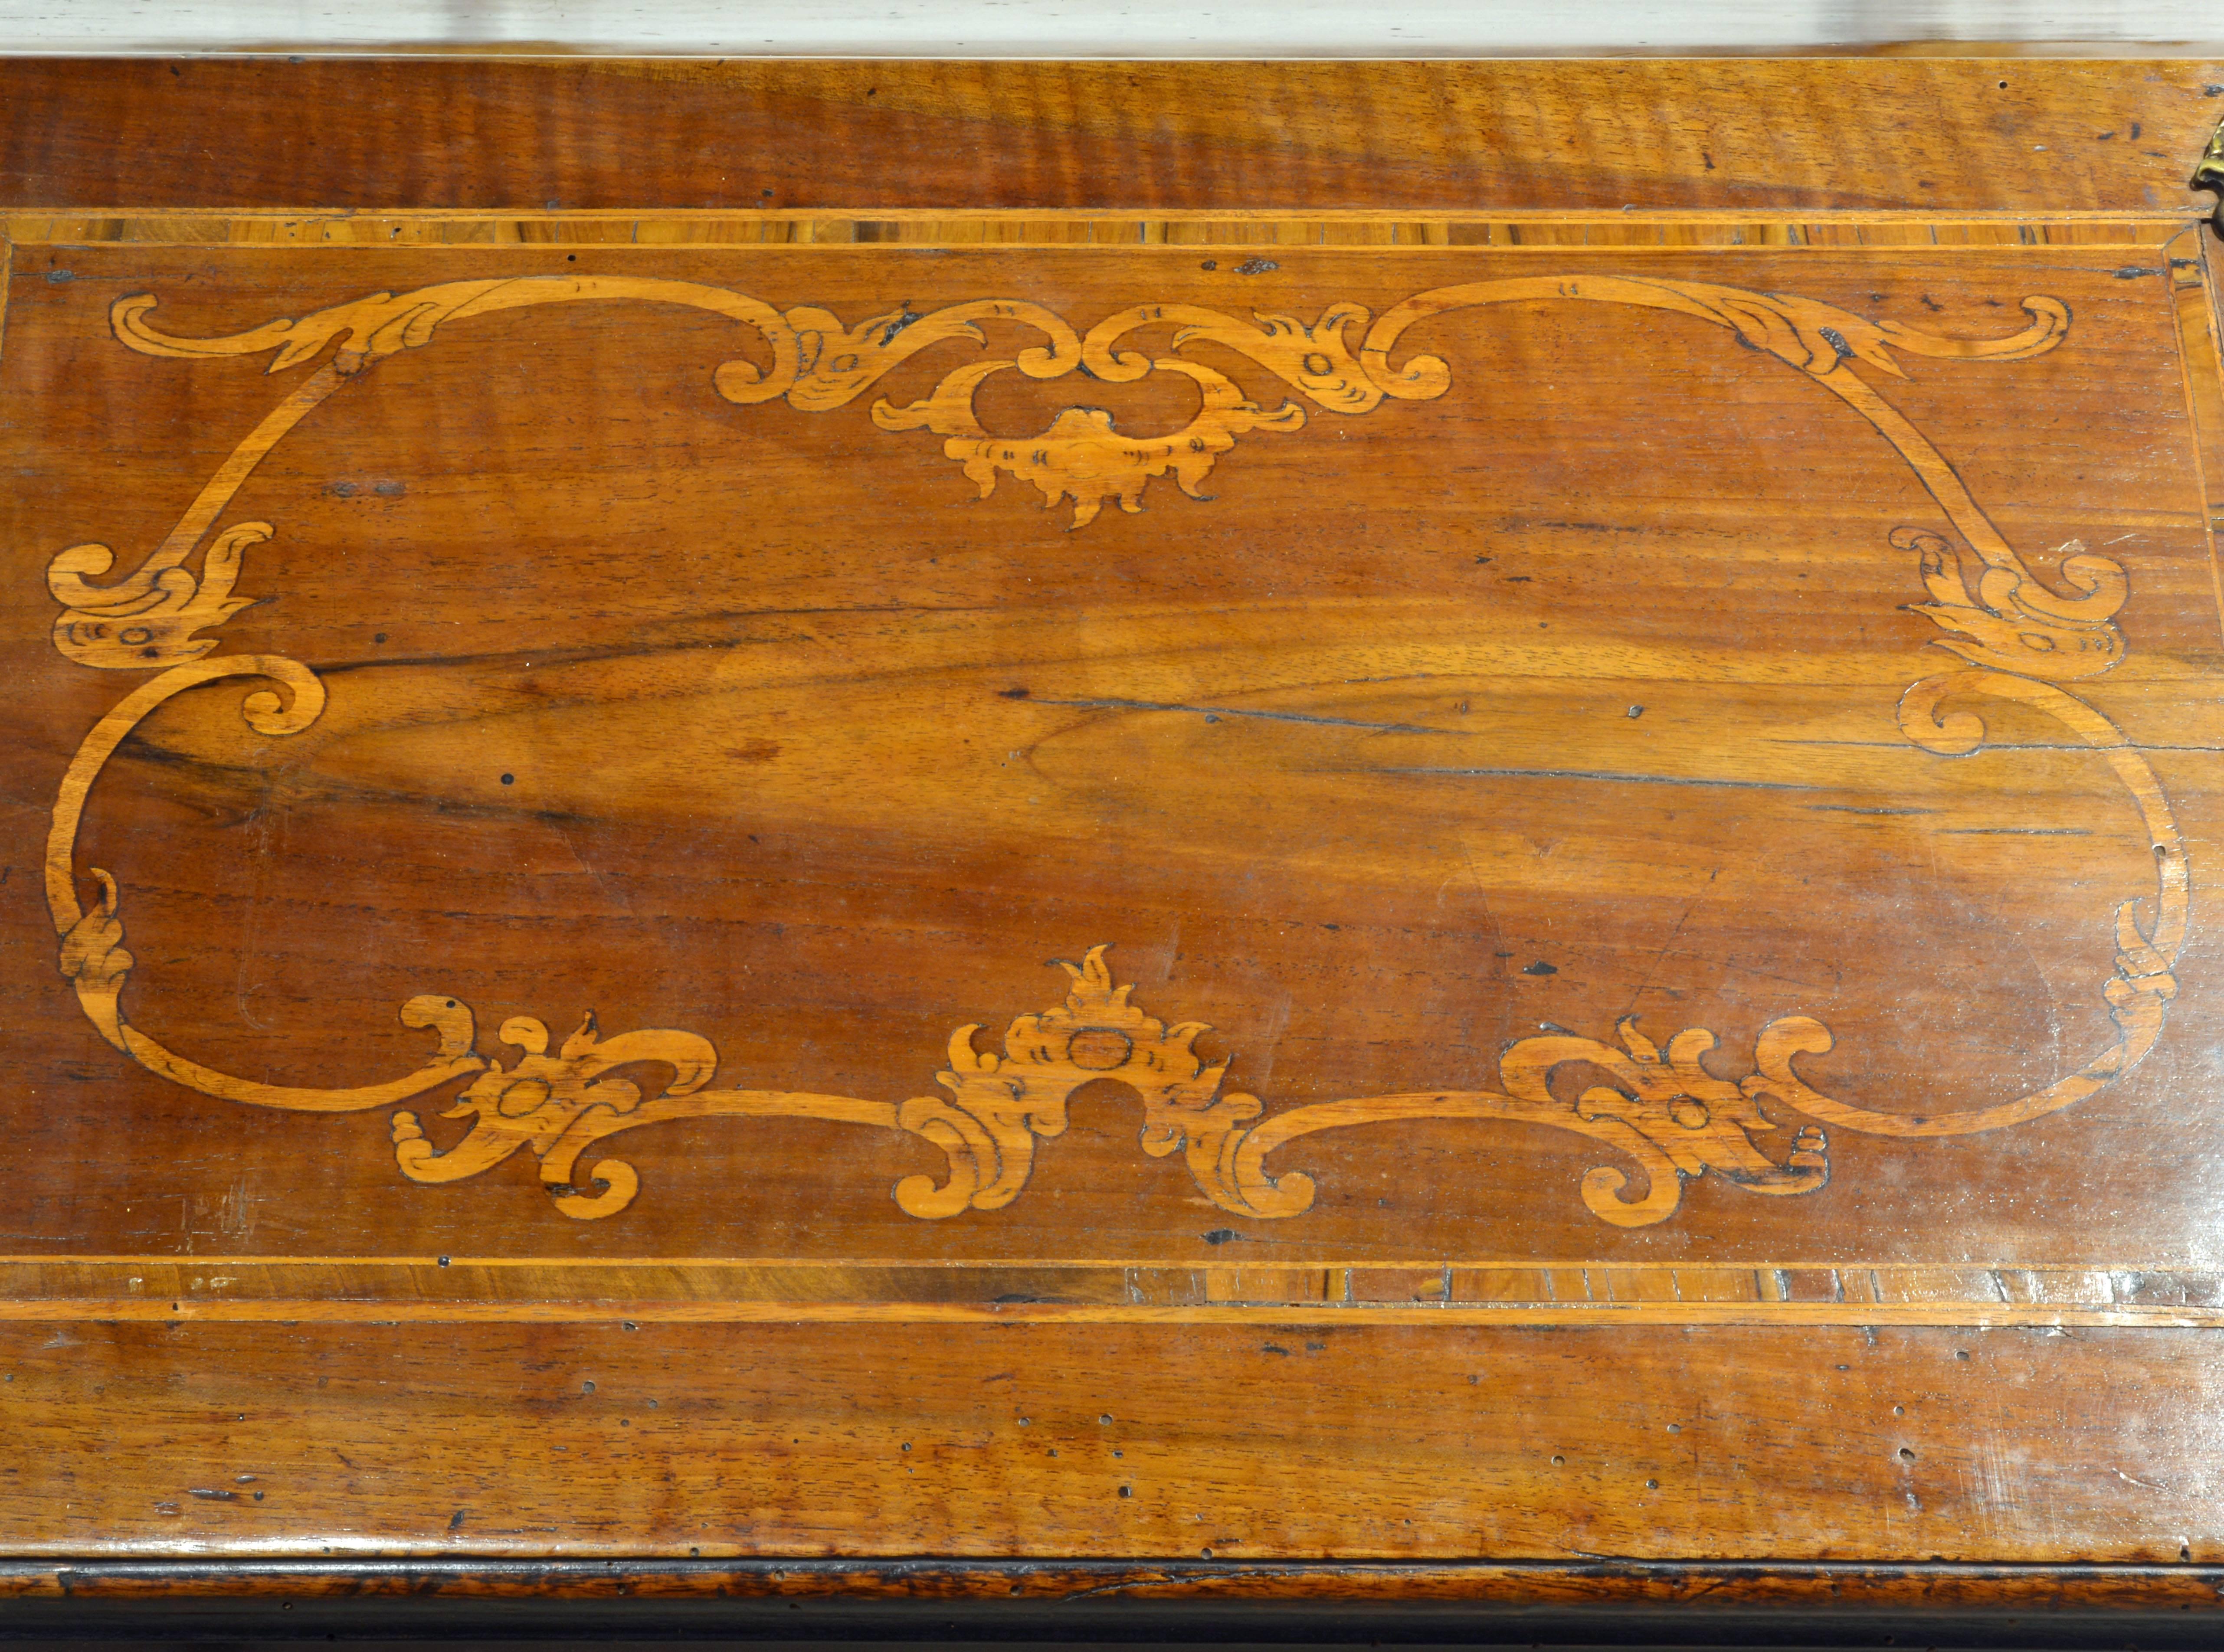 Charming 18th Century Italian Rococo Walnut and Fruitwood Inlaid Fall Front Desk (Italienisch)